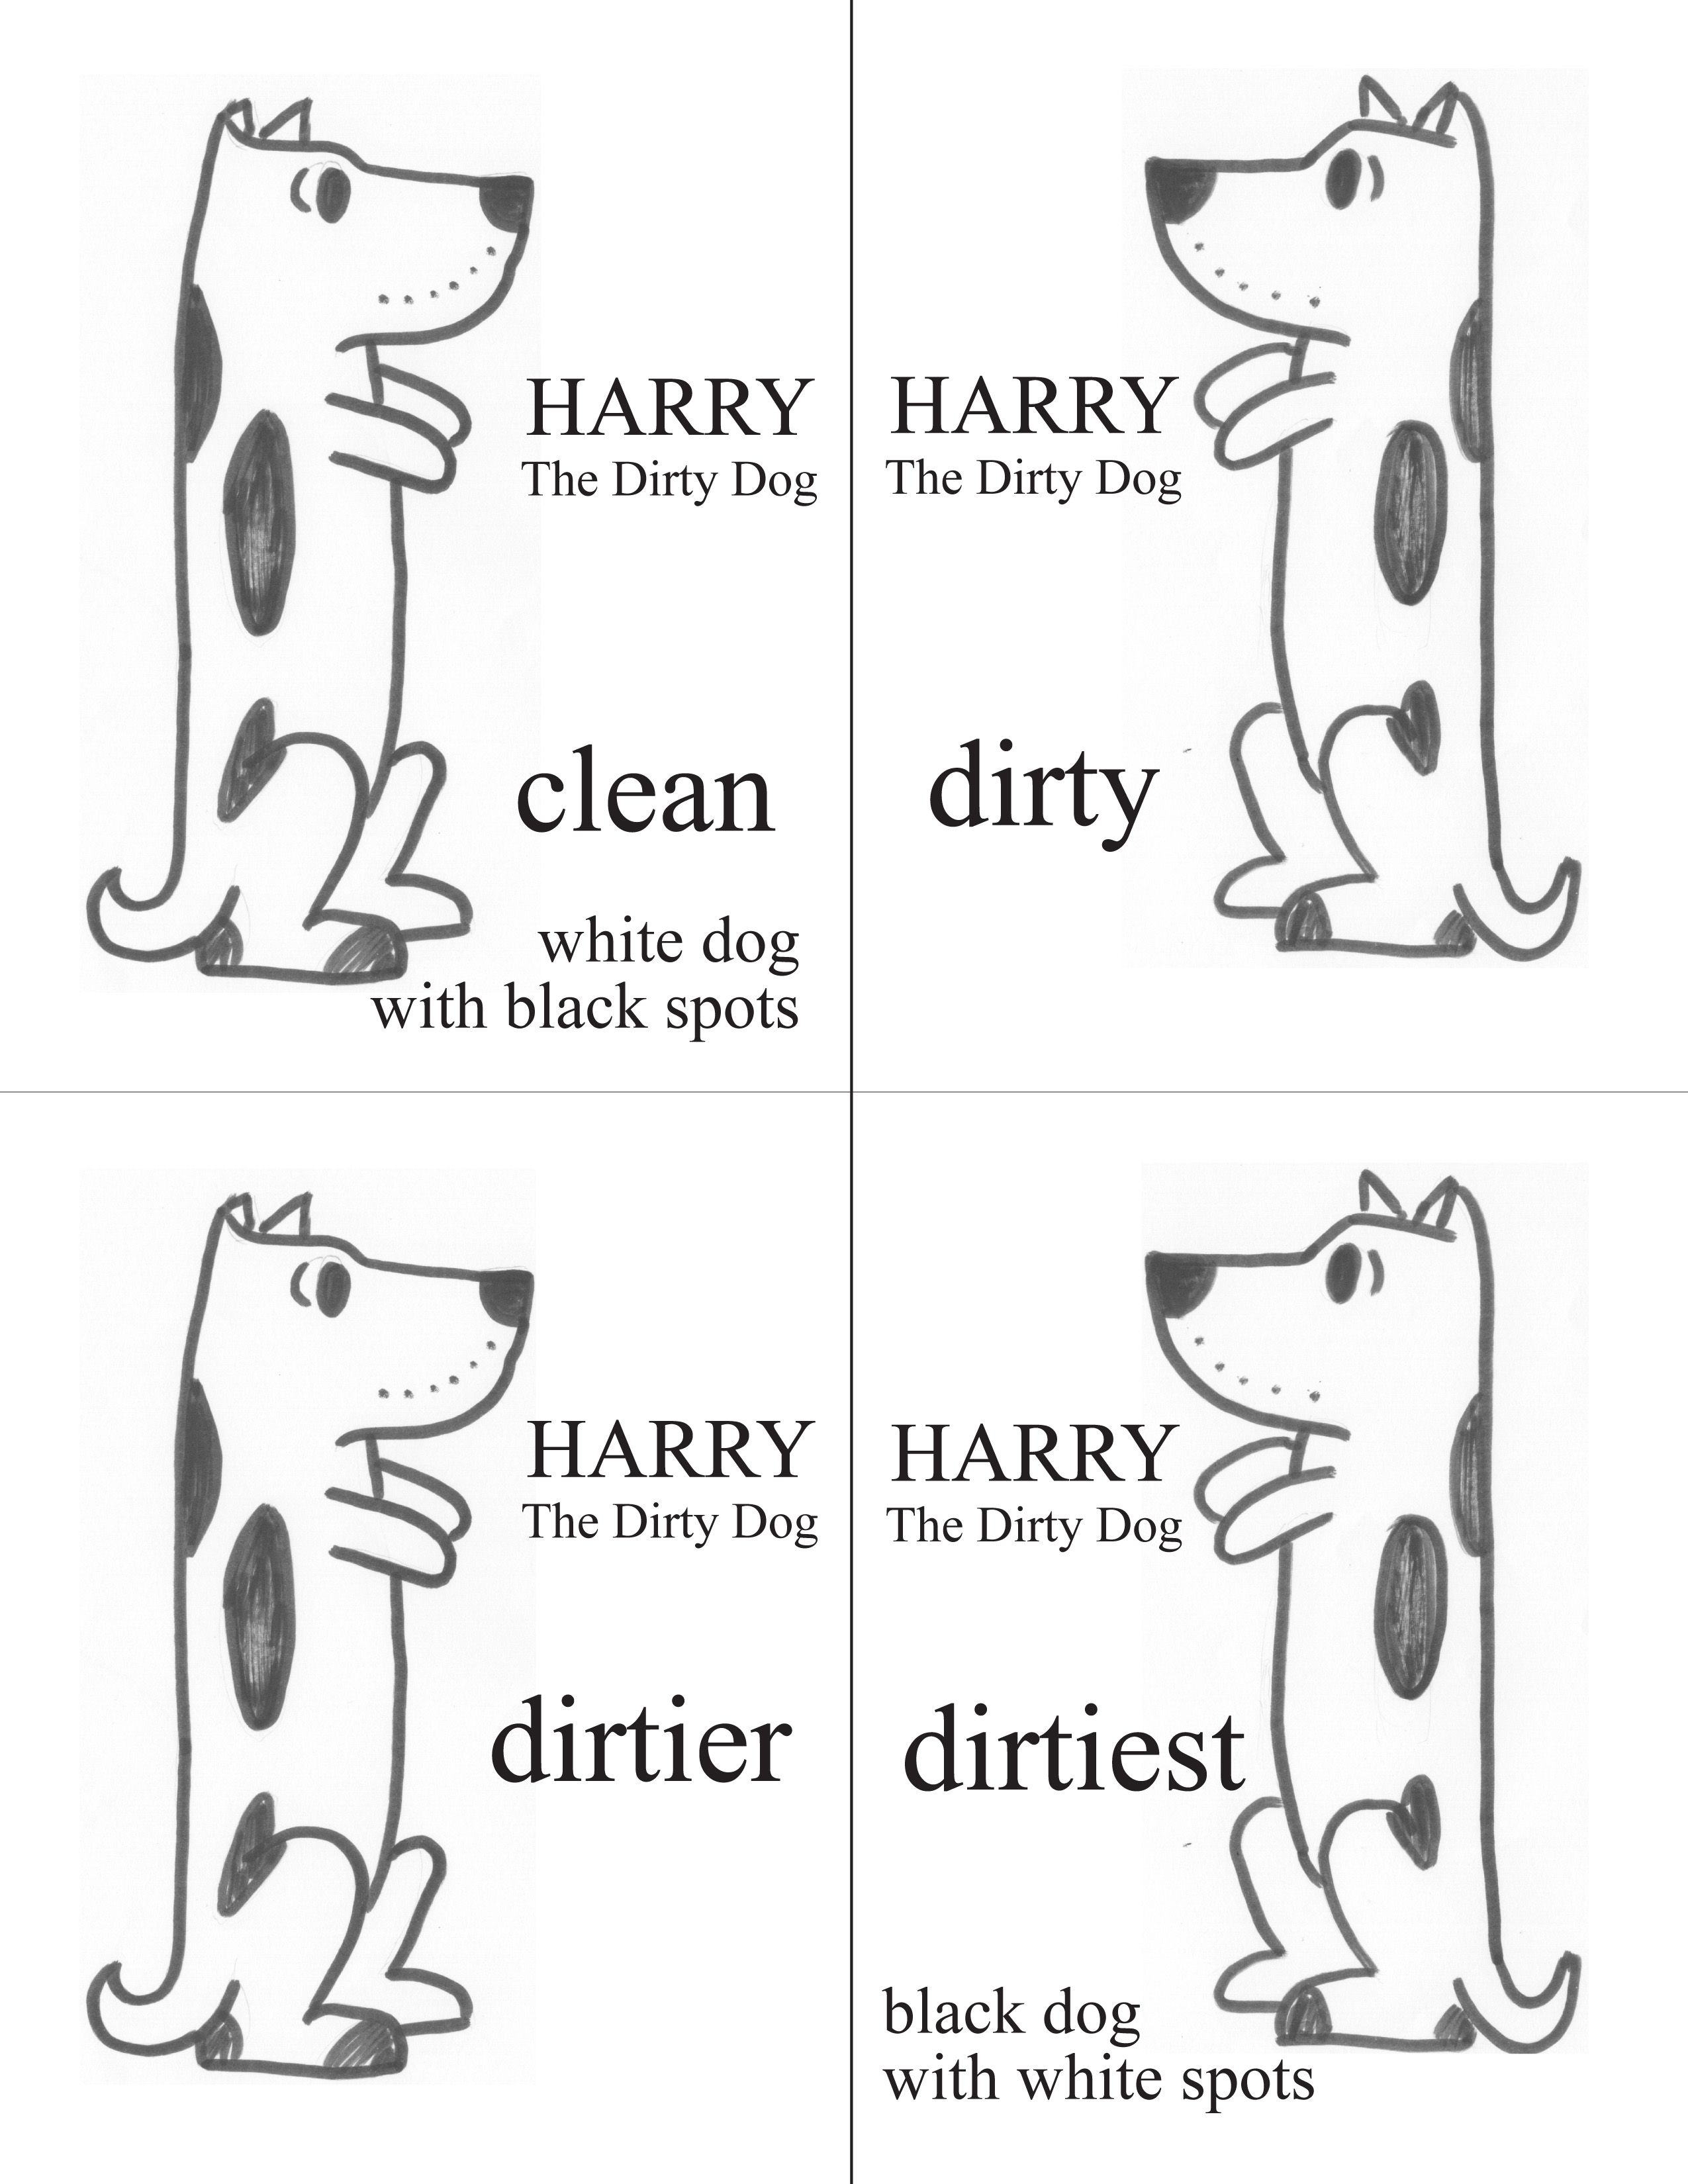 Harry the dirty dog activity have the kids make him dirty dirtier and dirtiest with mixing black and white paint oâ dirty dog dog activities dog coloring page